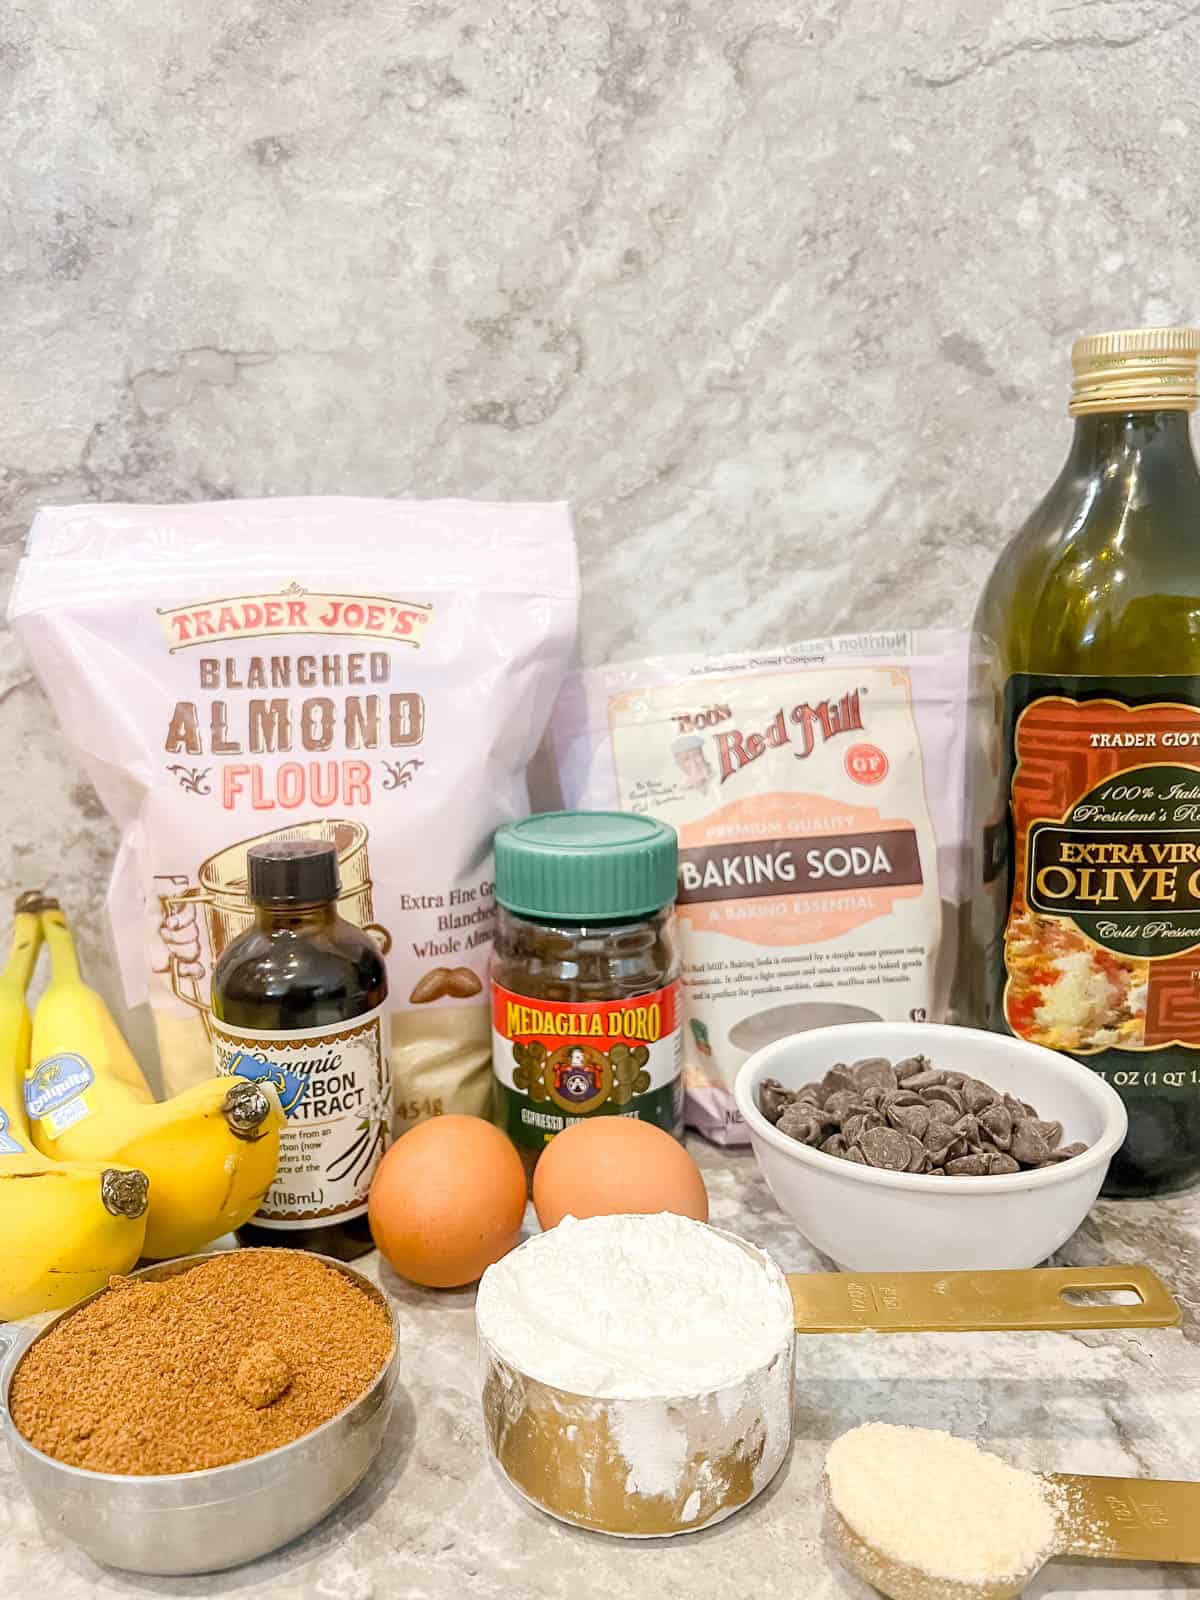 Ingredients needed to make Espresso Banana Bread with chocolate chips.